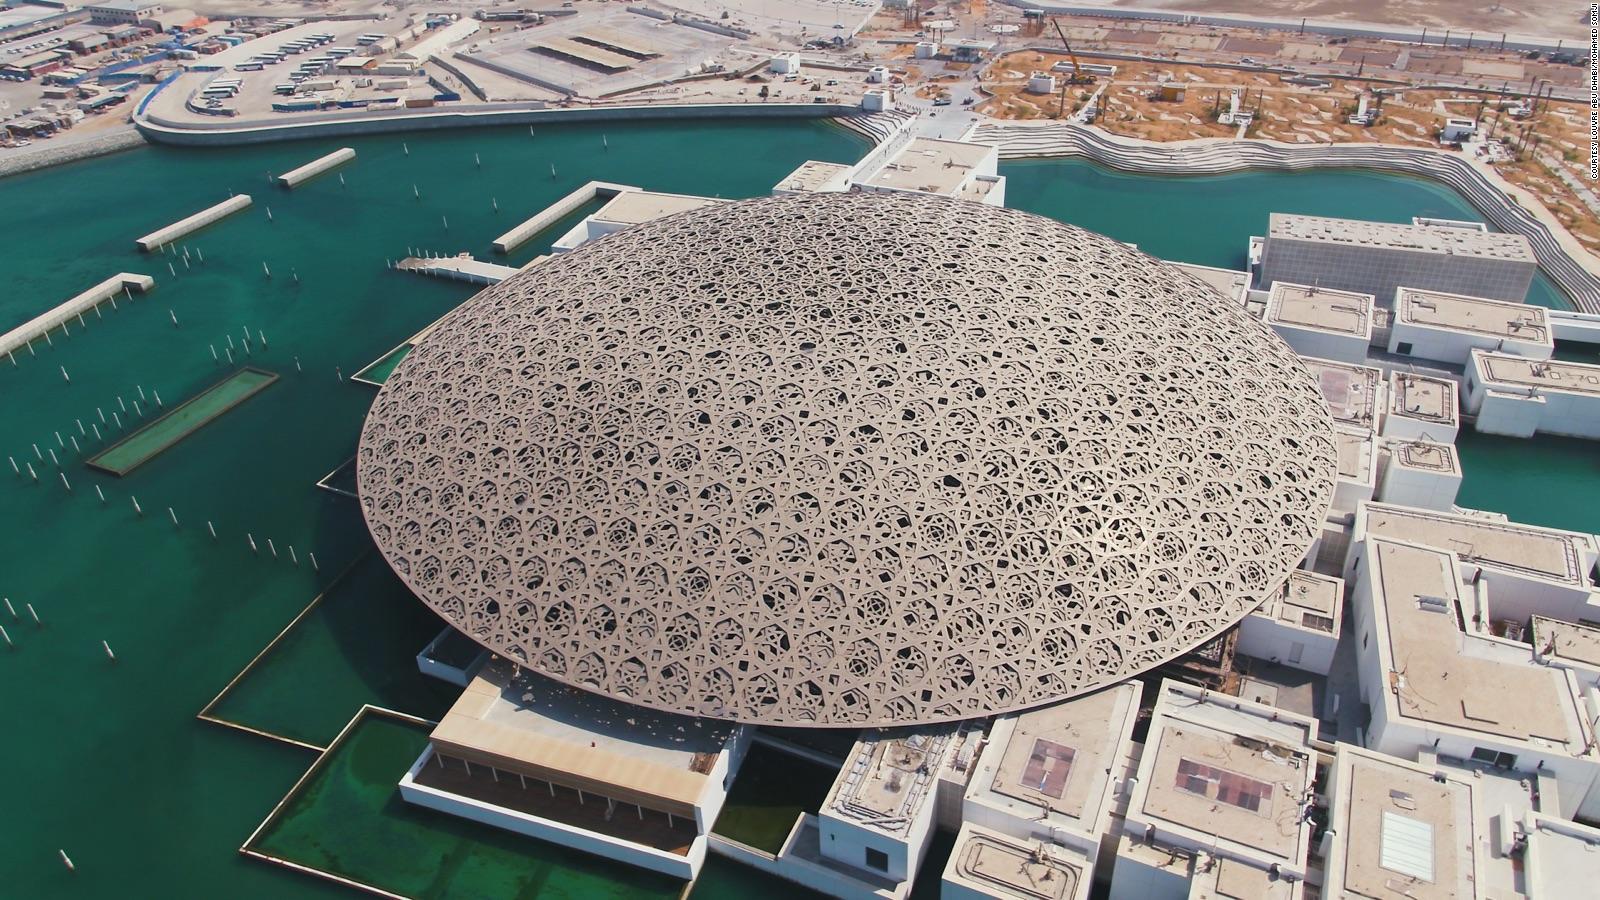 Louvre Abu Dhabi receives 1 million visitors in its first year - CNN Style